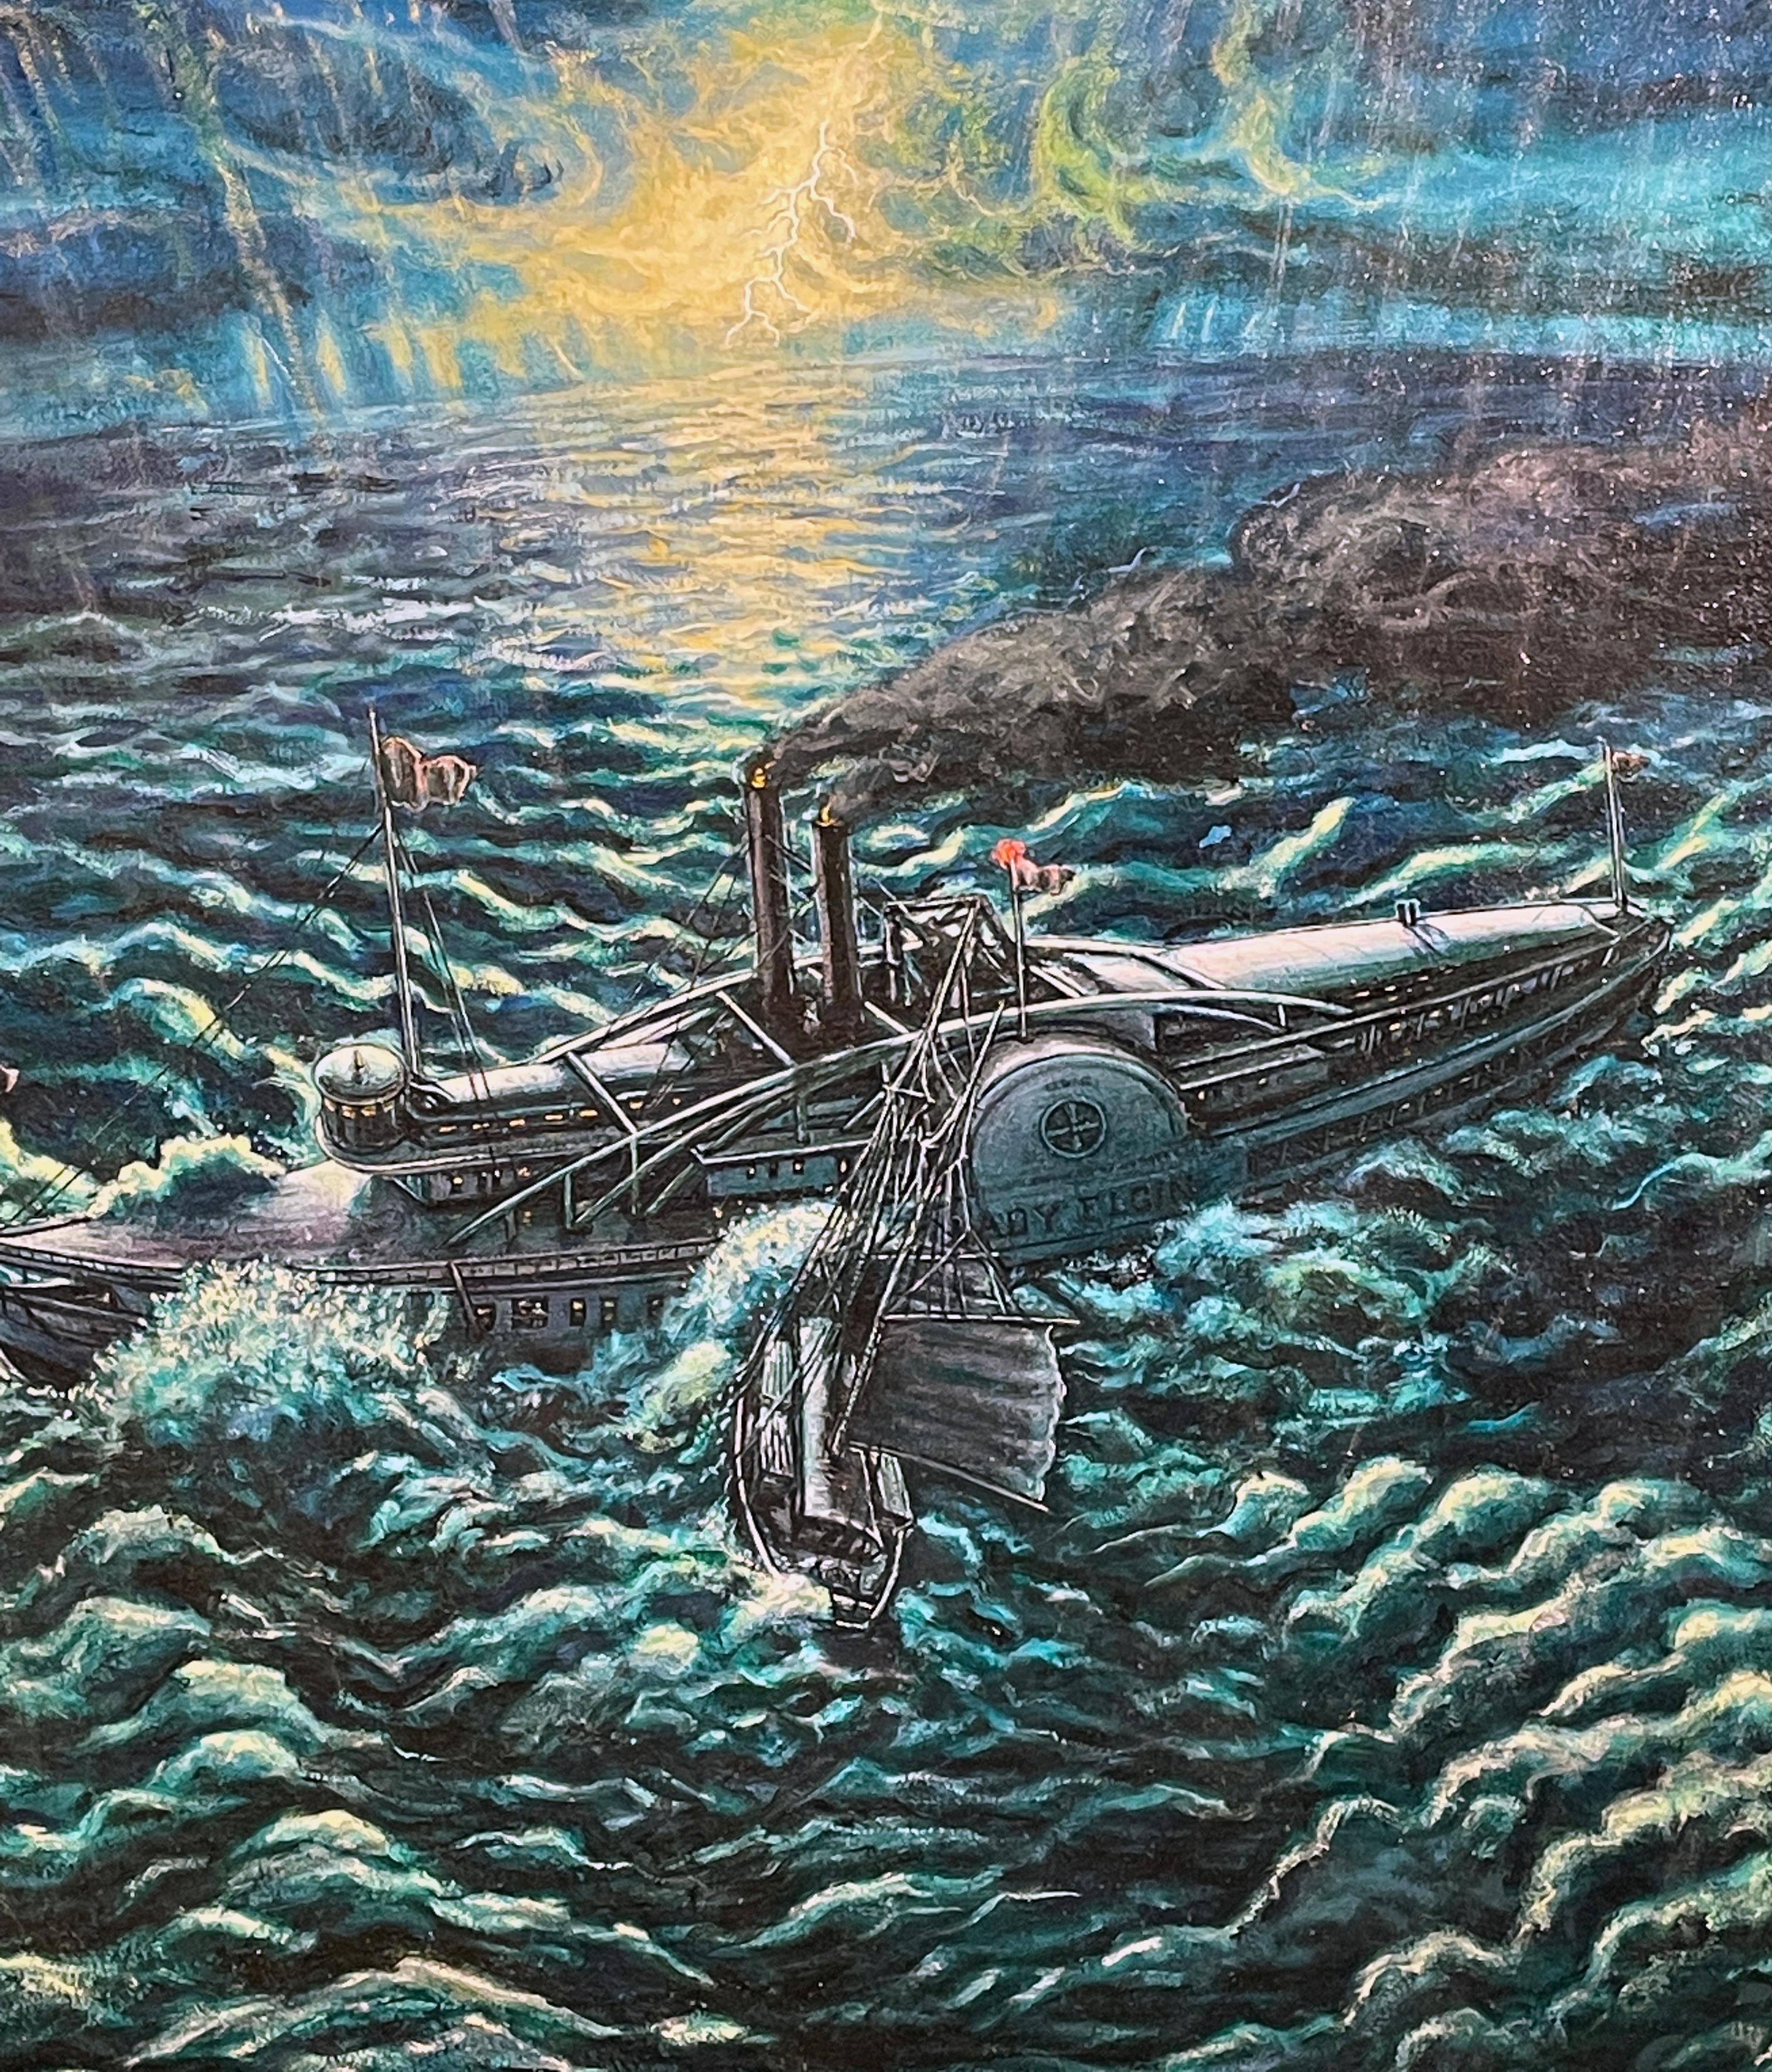 Last Voyage of the Lady Elgin - Detailed Painting of an Historic Ship Disaster - Blue Landscape Painting by Eric Edward Esper